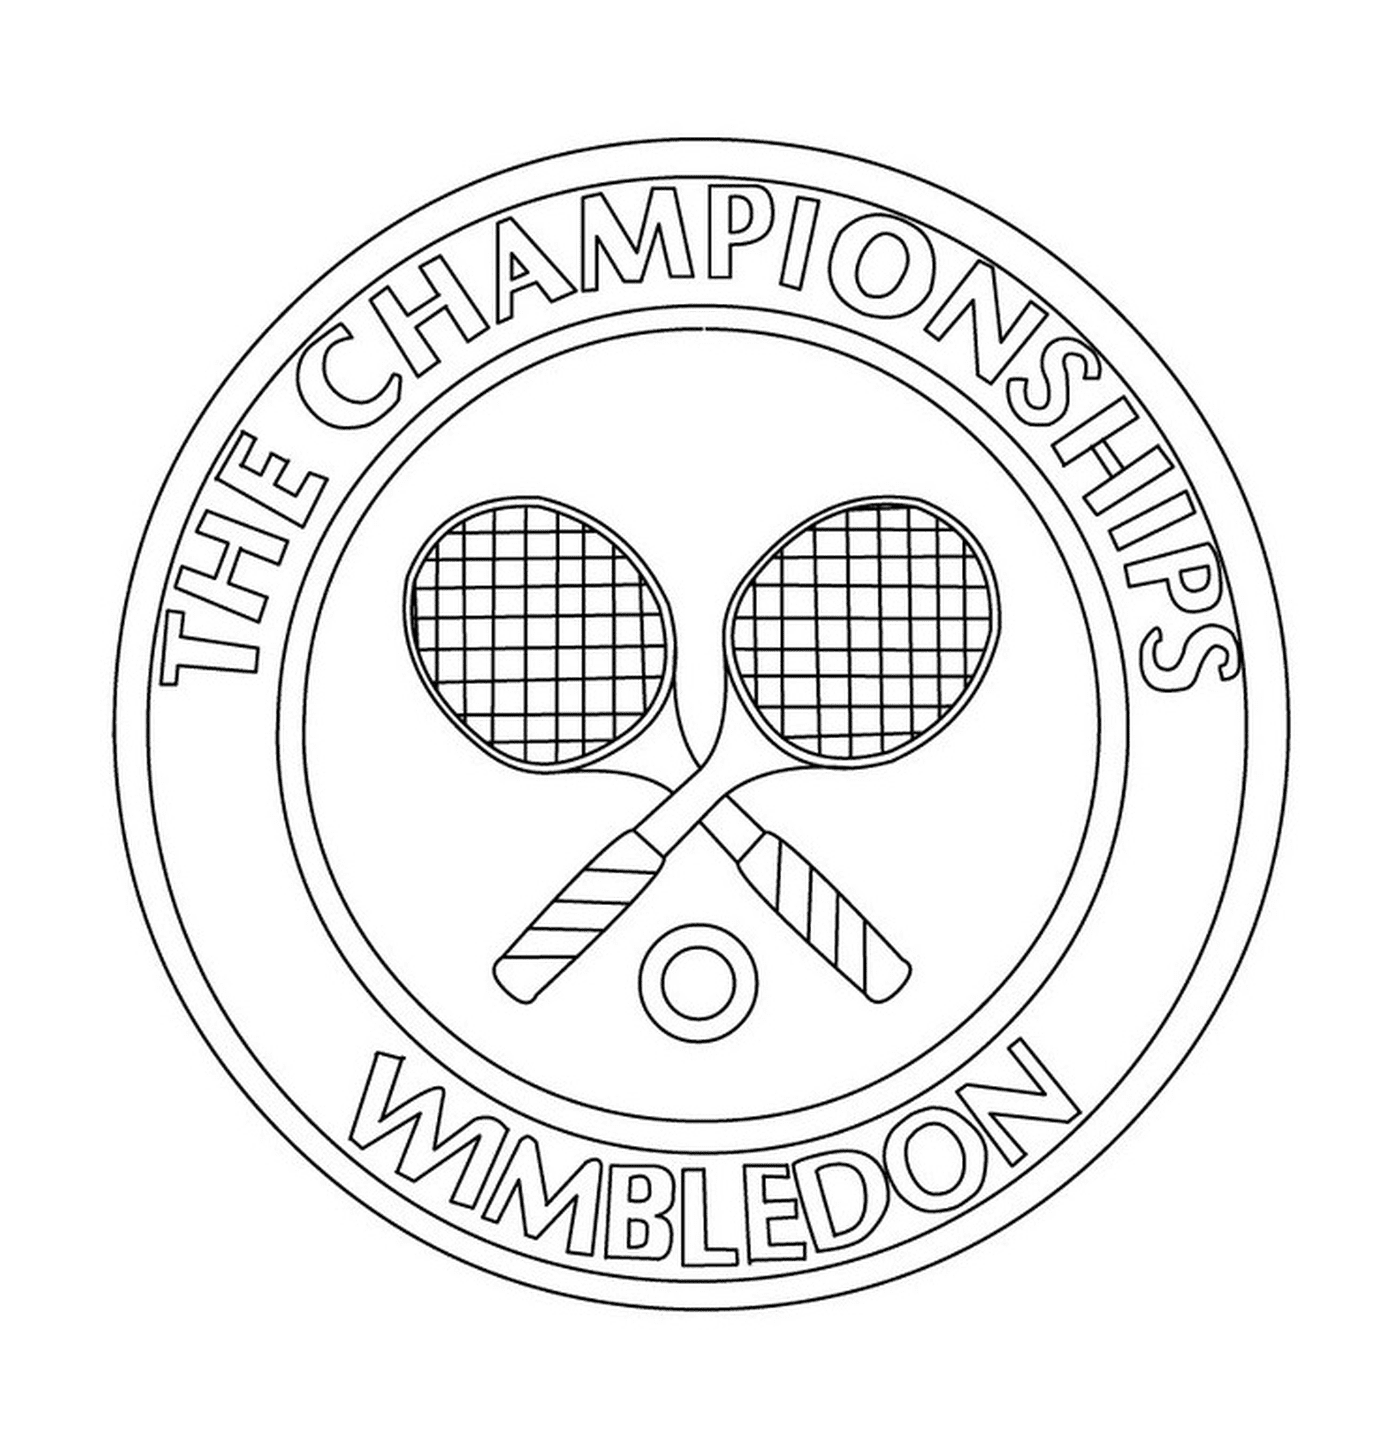 coloriage tennis the championships wmbledon